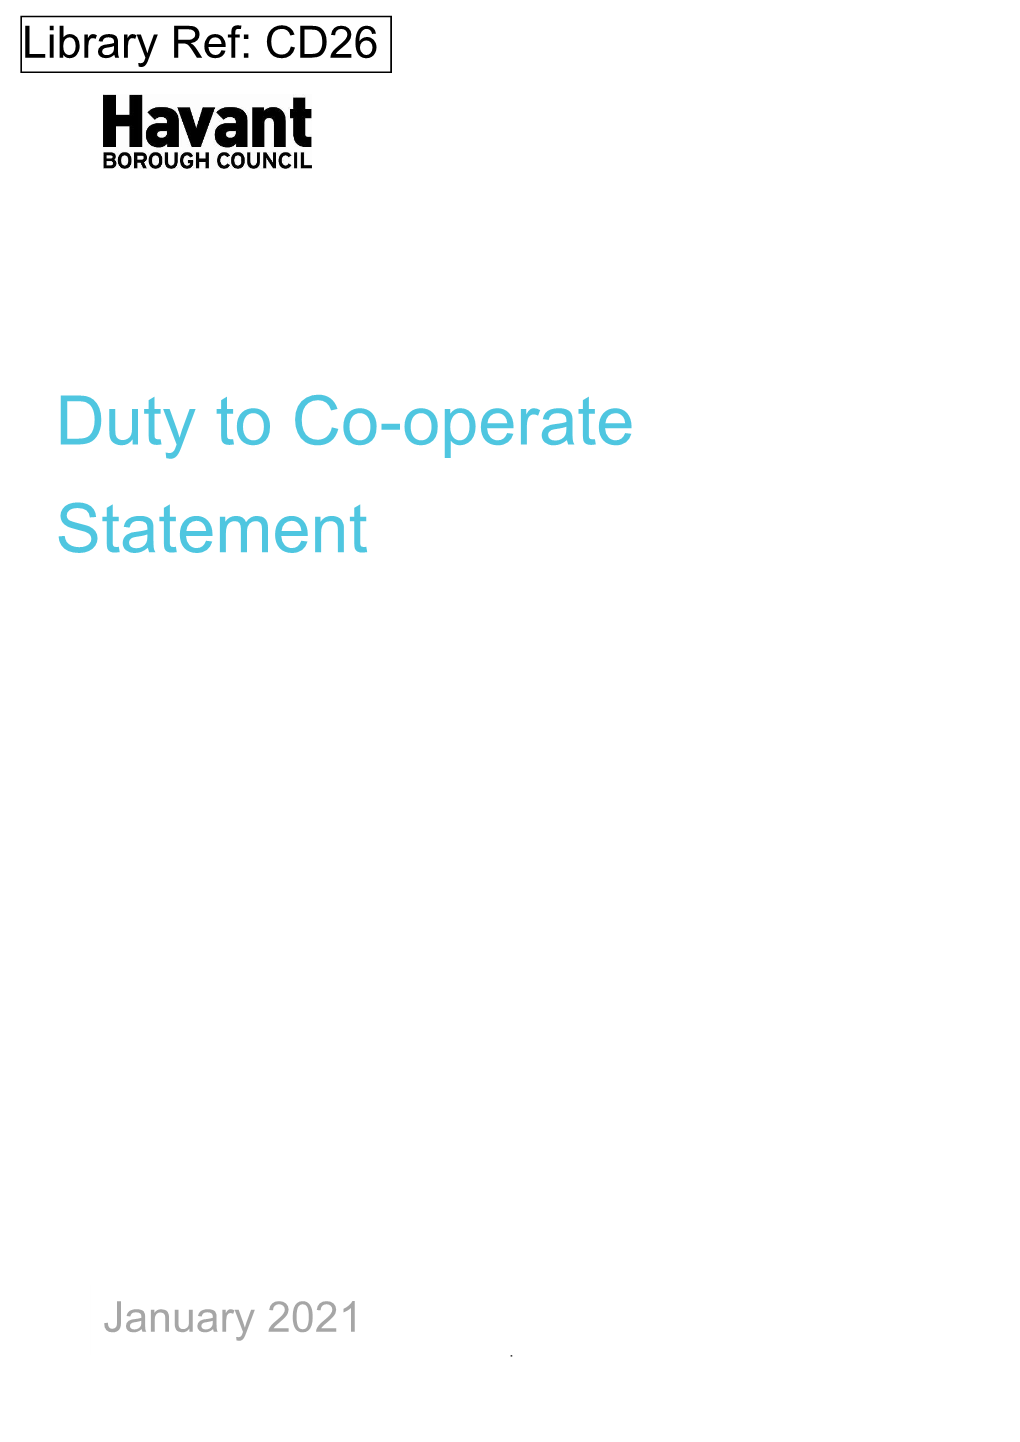 Duty to Co-Operate Statement